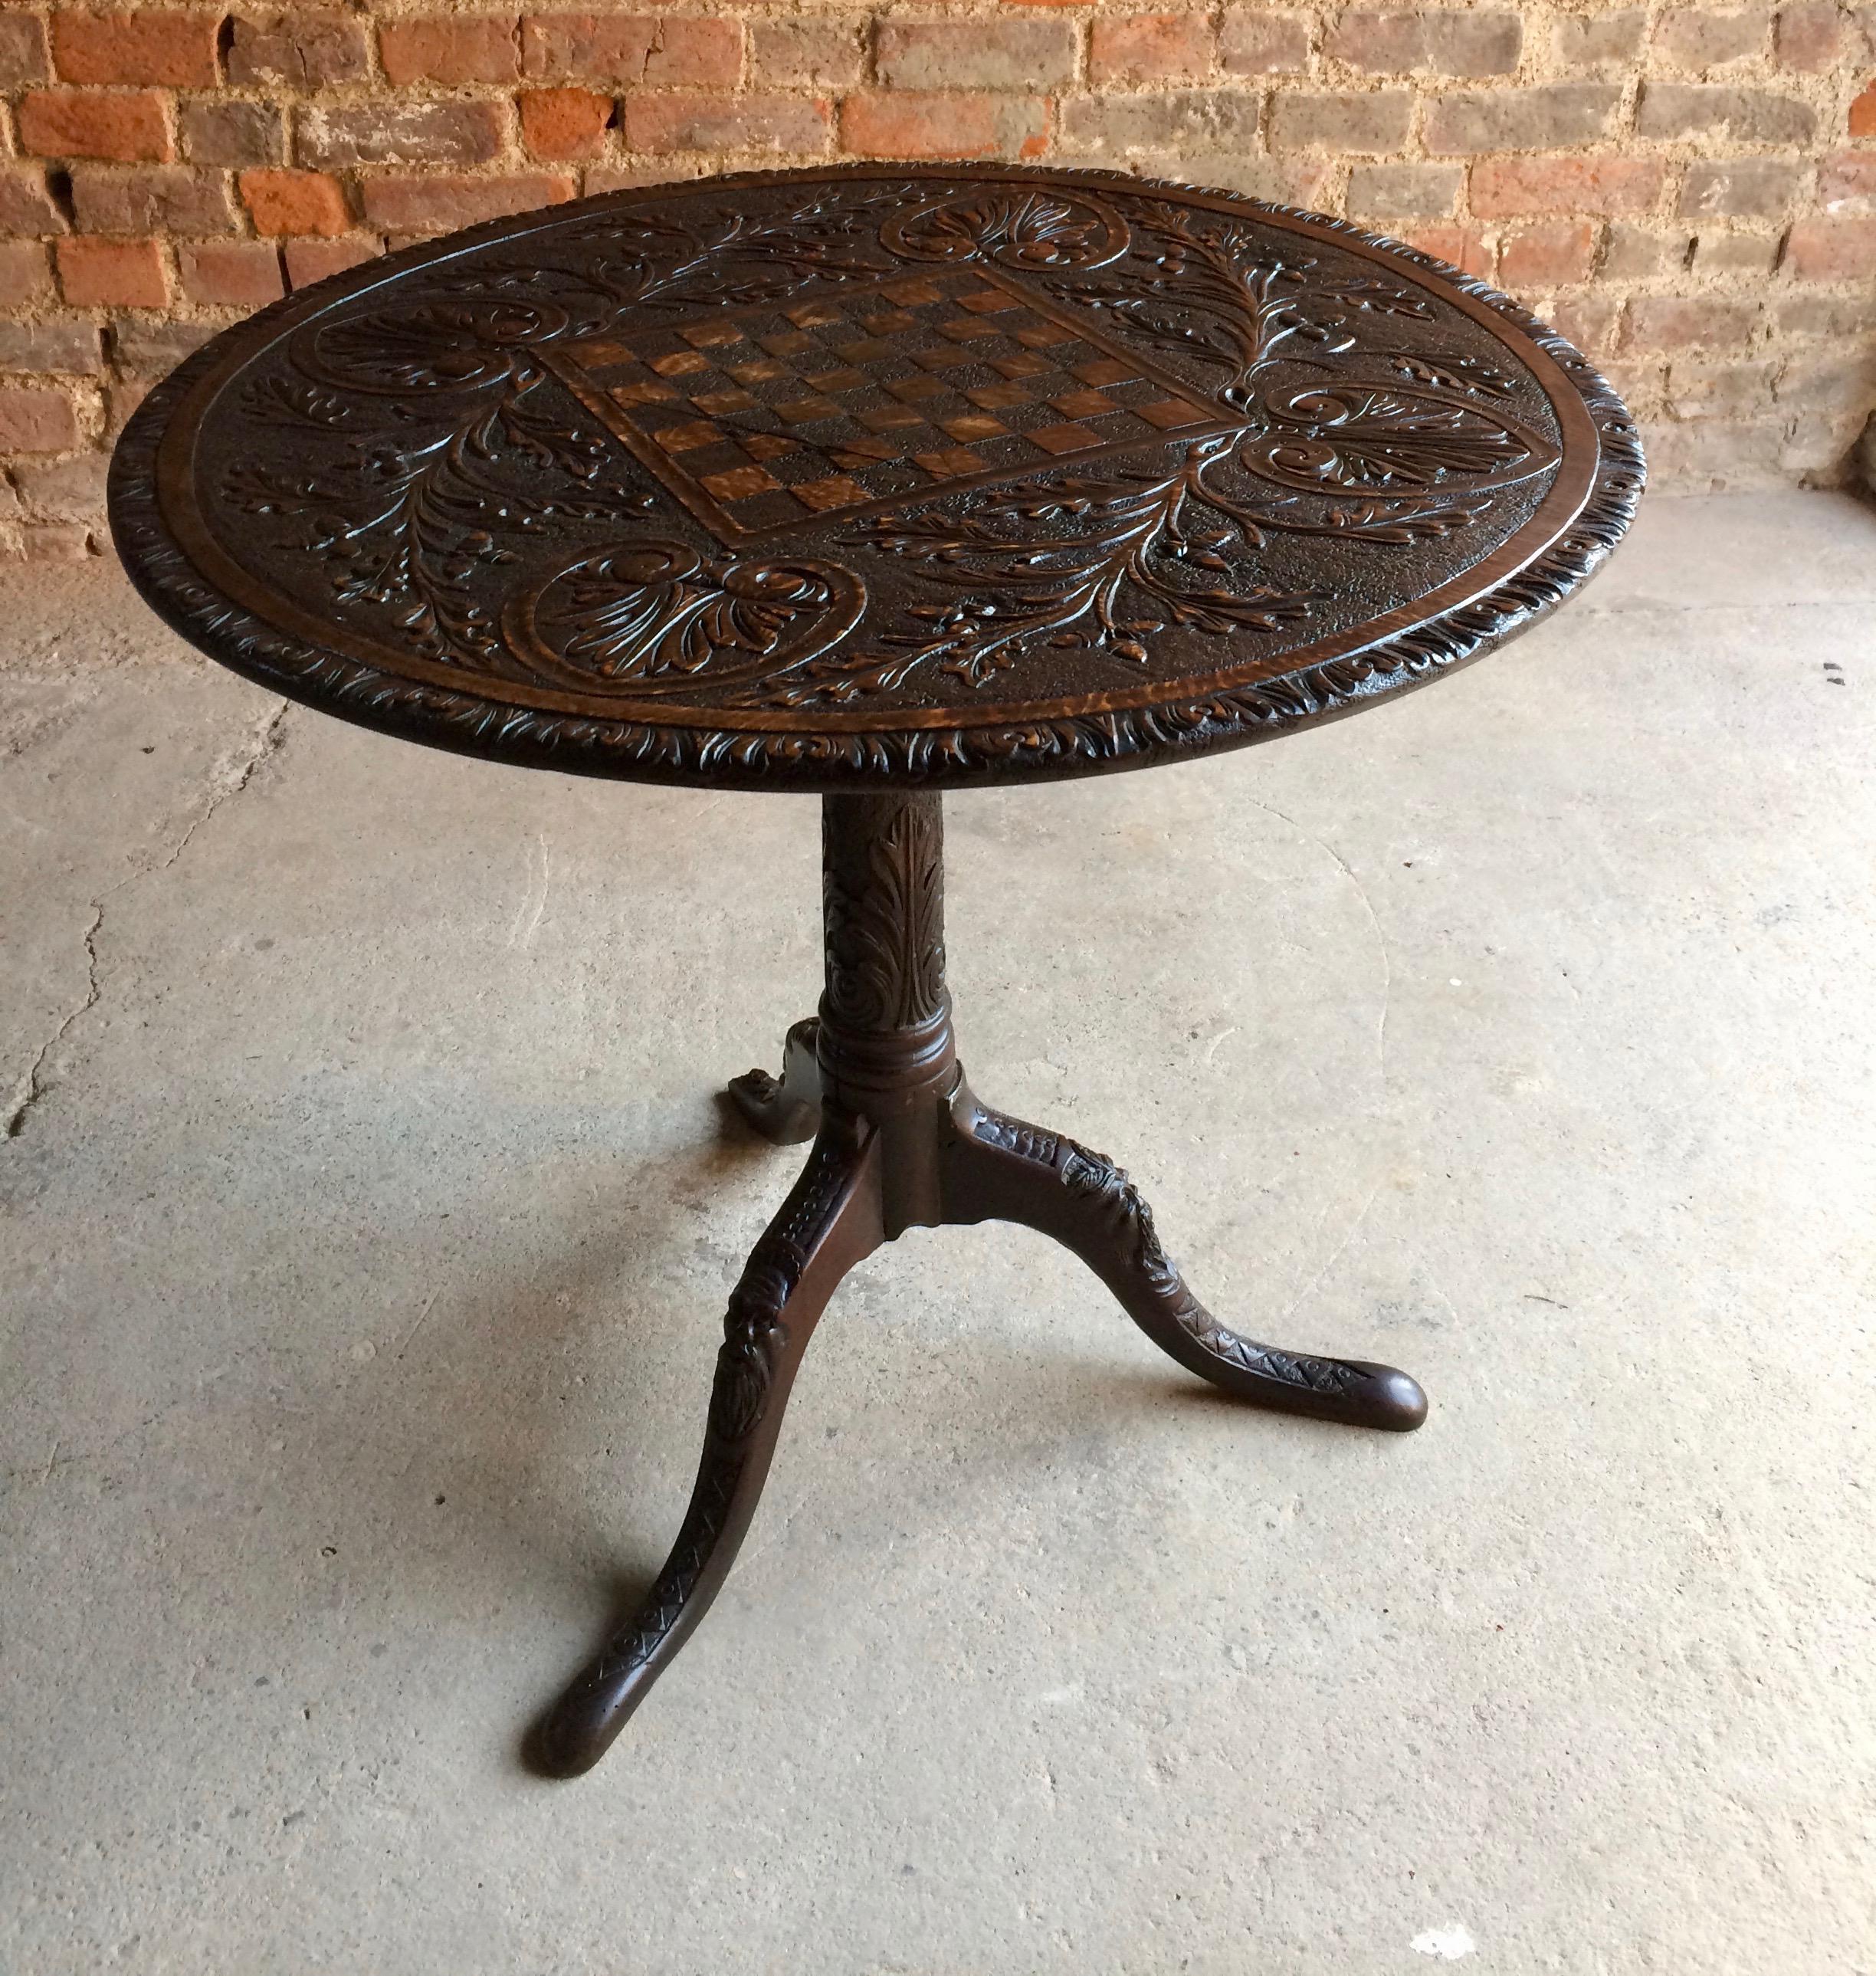 Antique 18th century solid English oak tilt-top tri pod table dating to circa 1780, the heavily carved circular top featuring carved vines with acorns, hearts and chess board, the carved supporting base with forged iron hinges. And three heavily